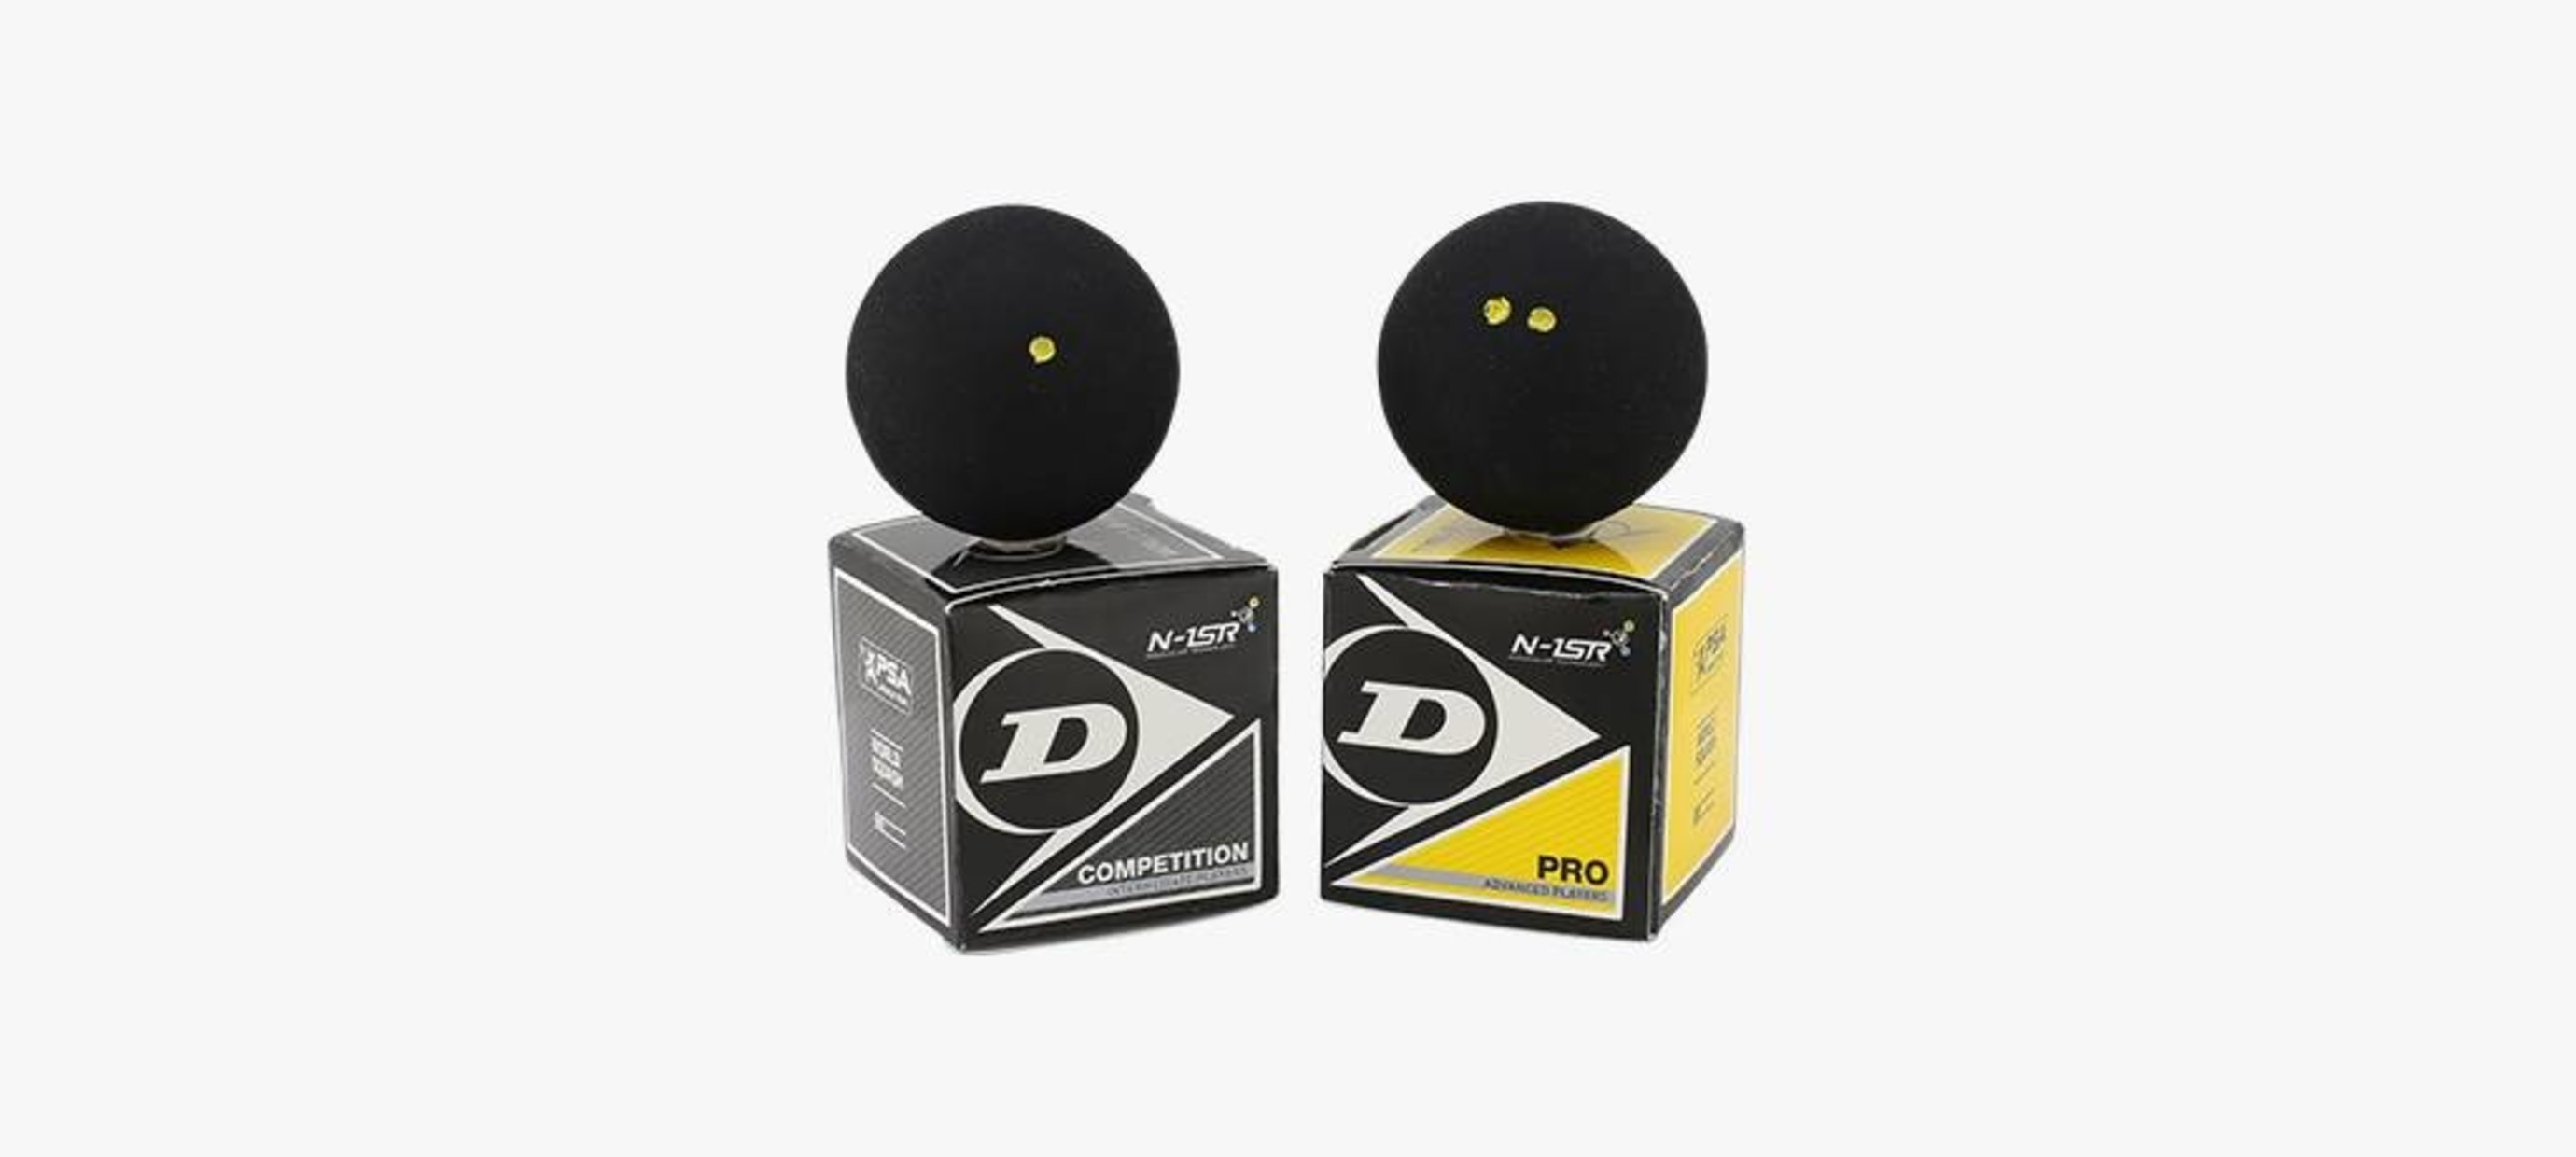 Dunlop Squash Balls Pro Double Yellow Dot & Competition Yellow & Intro Blue 